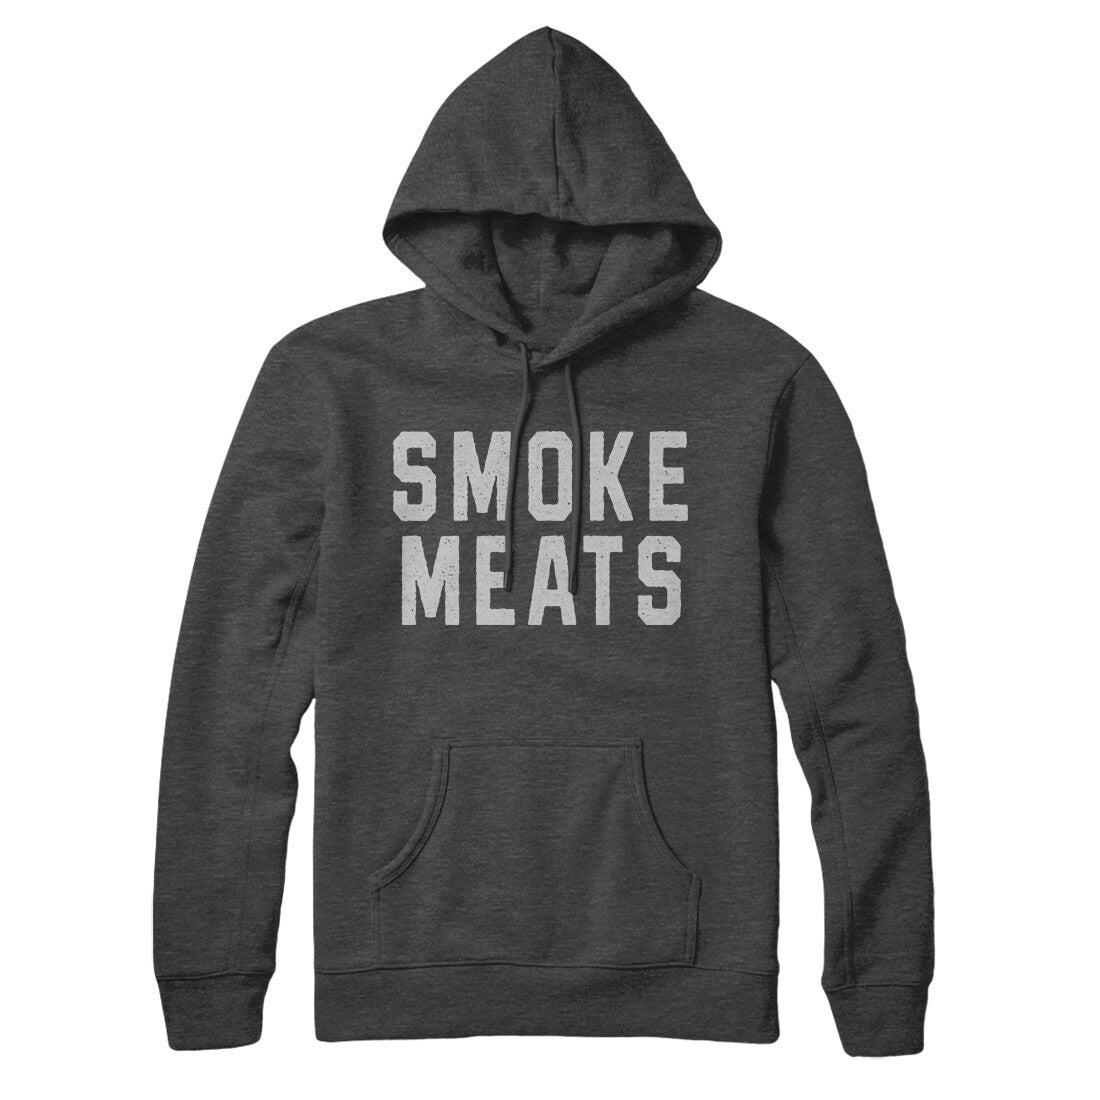 Smoke Meats in Charcoal Heather Color